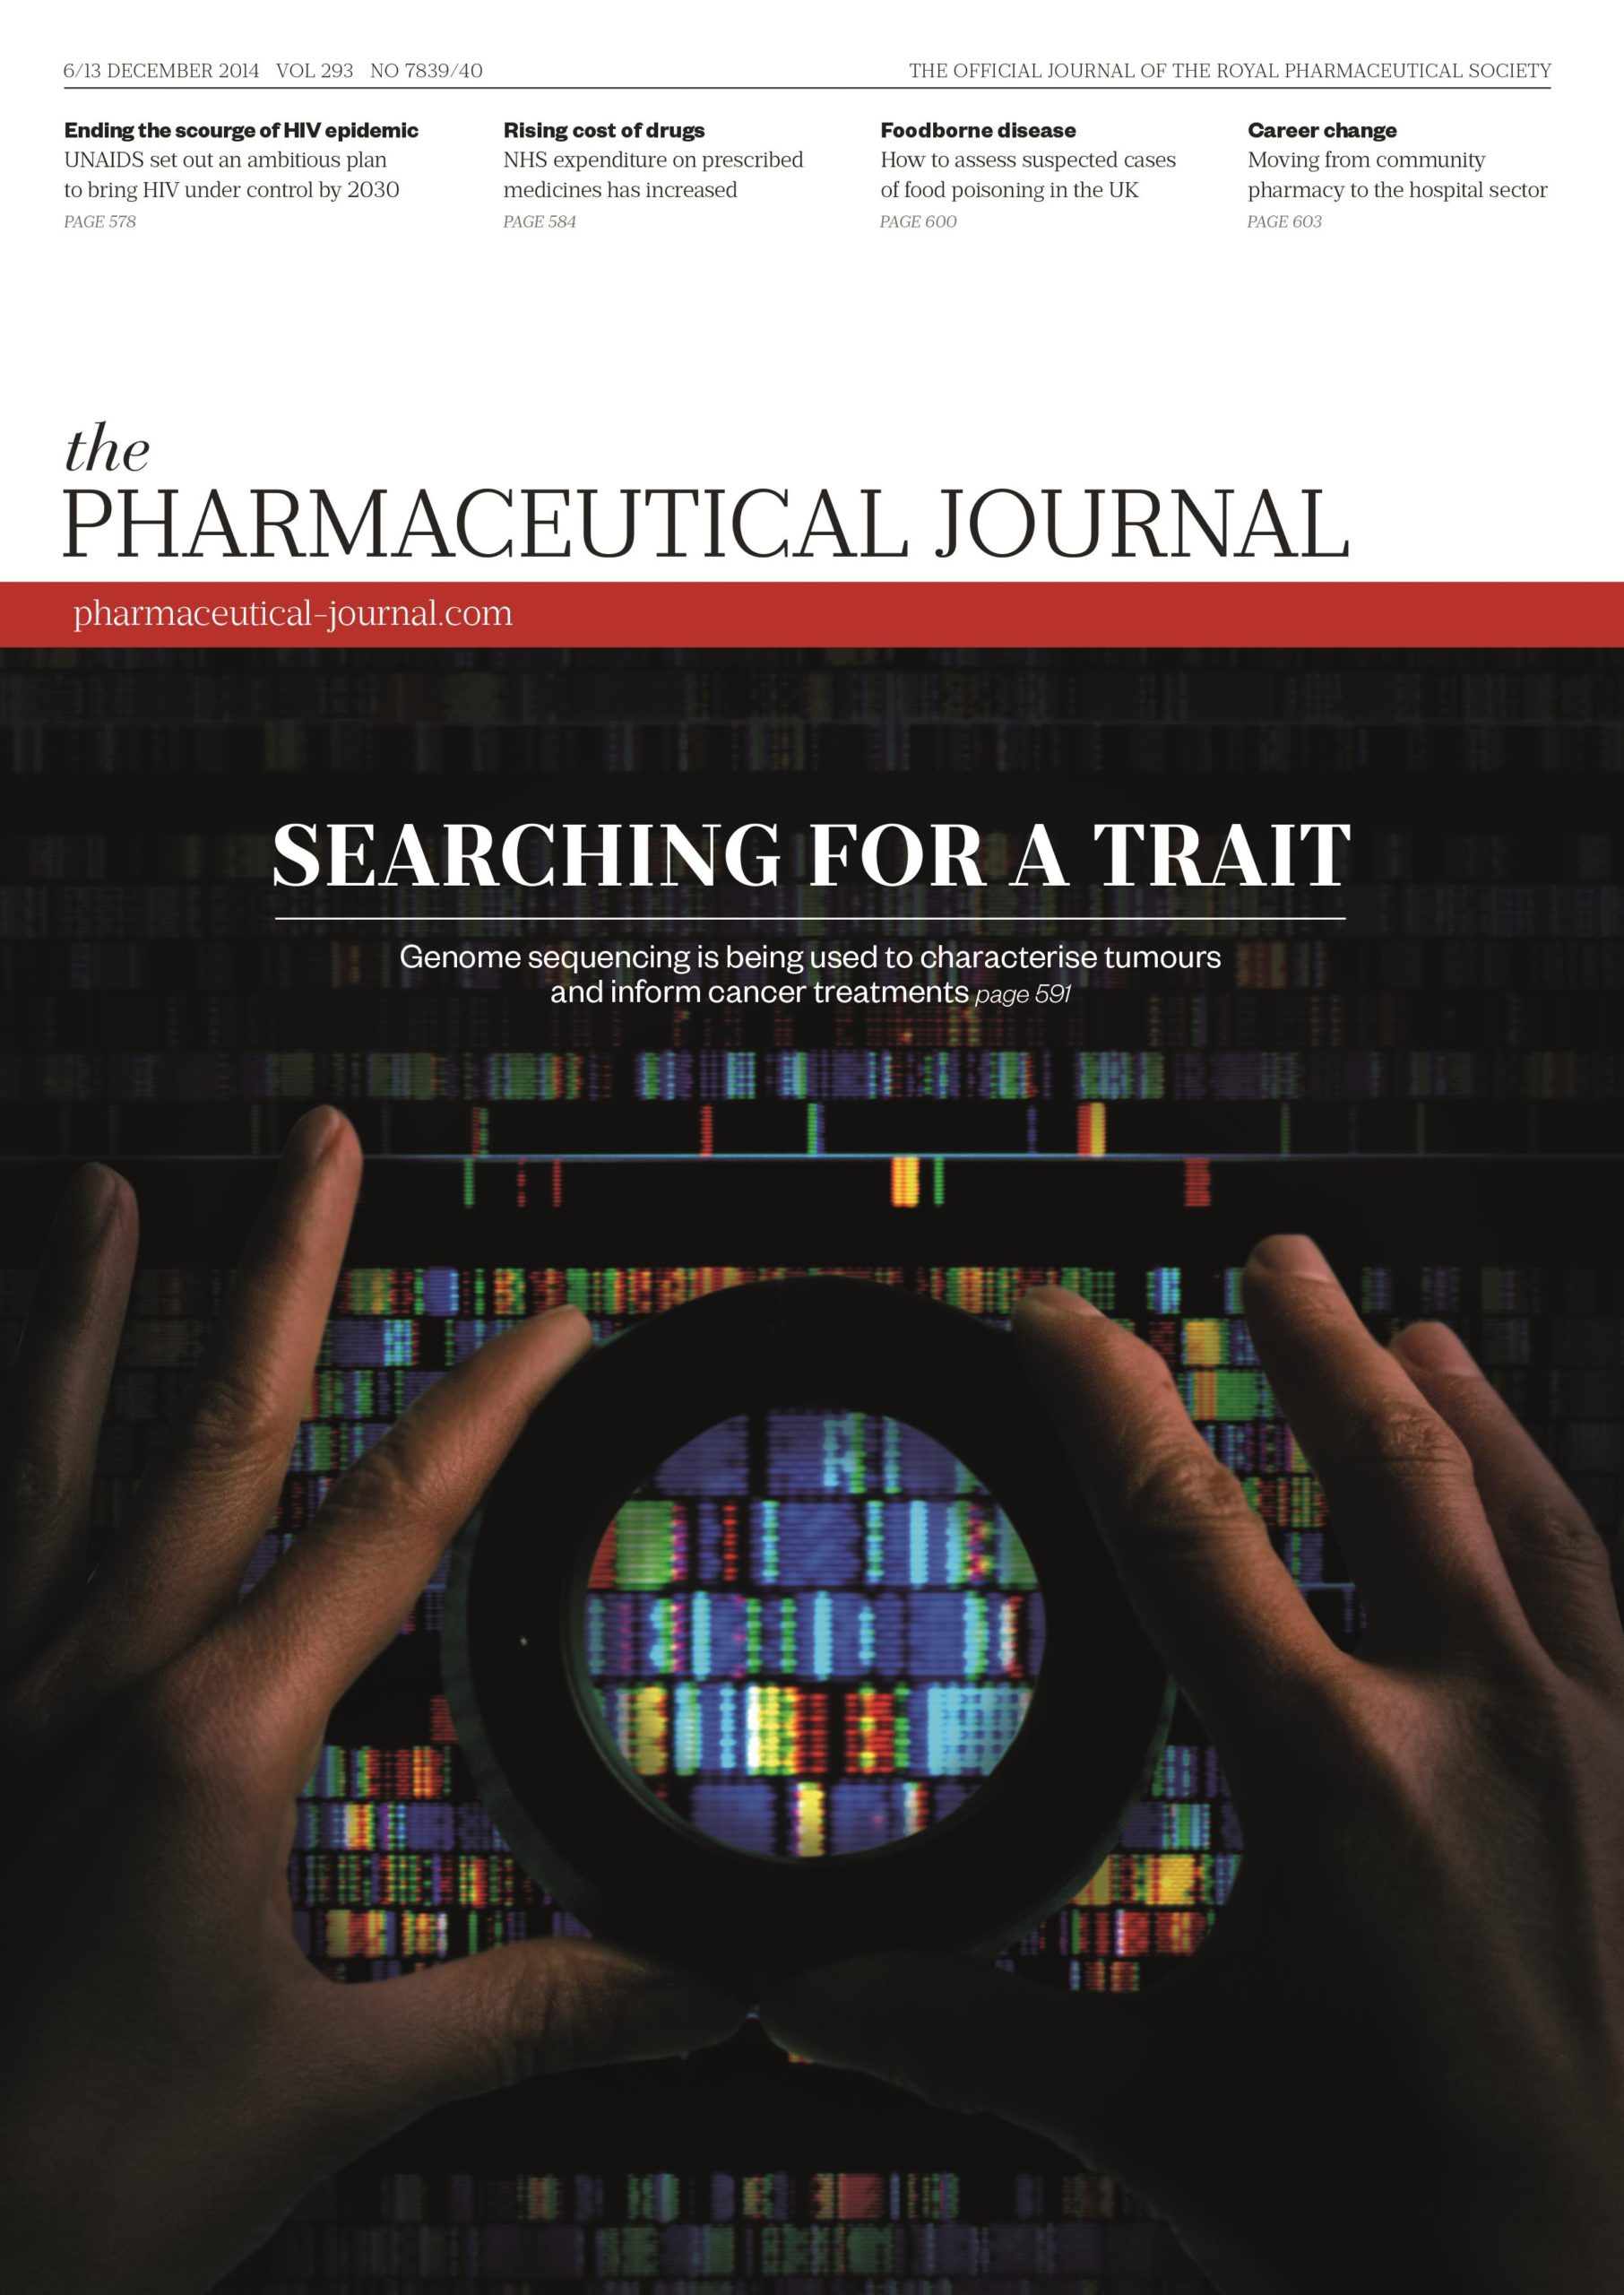 Publication issue cover for PJ, 6/13 December 2014, Vol 293, No 7839/40